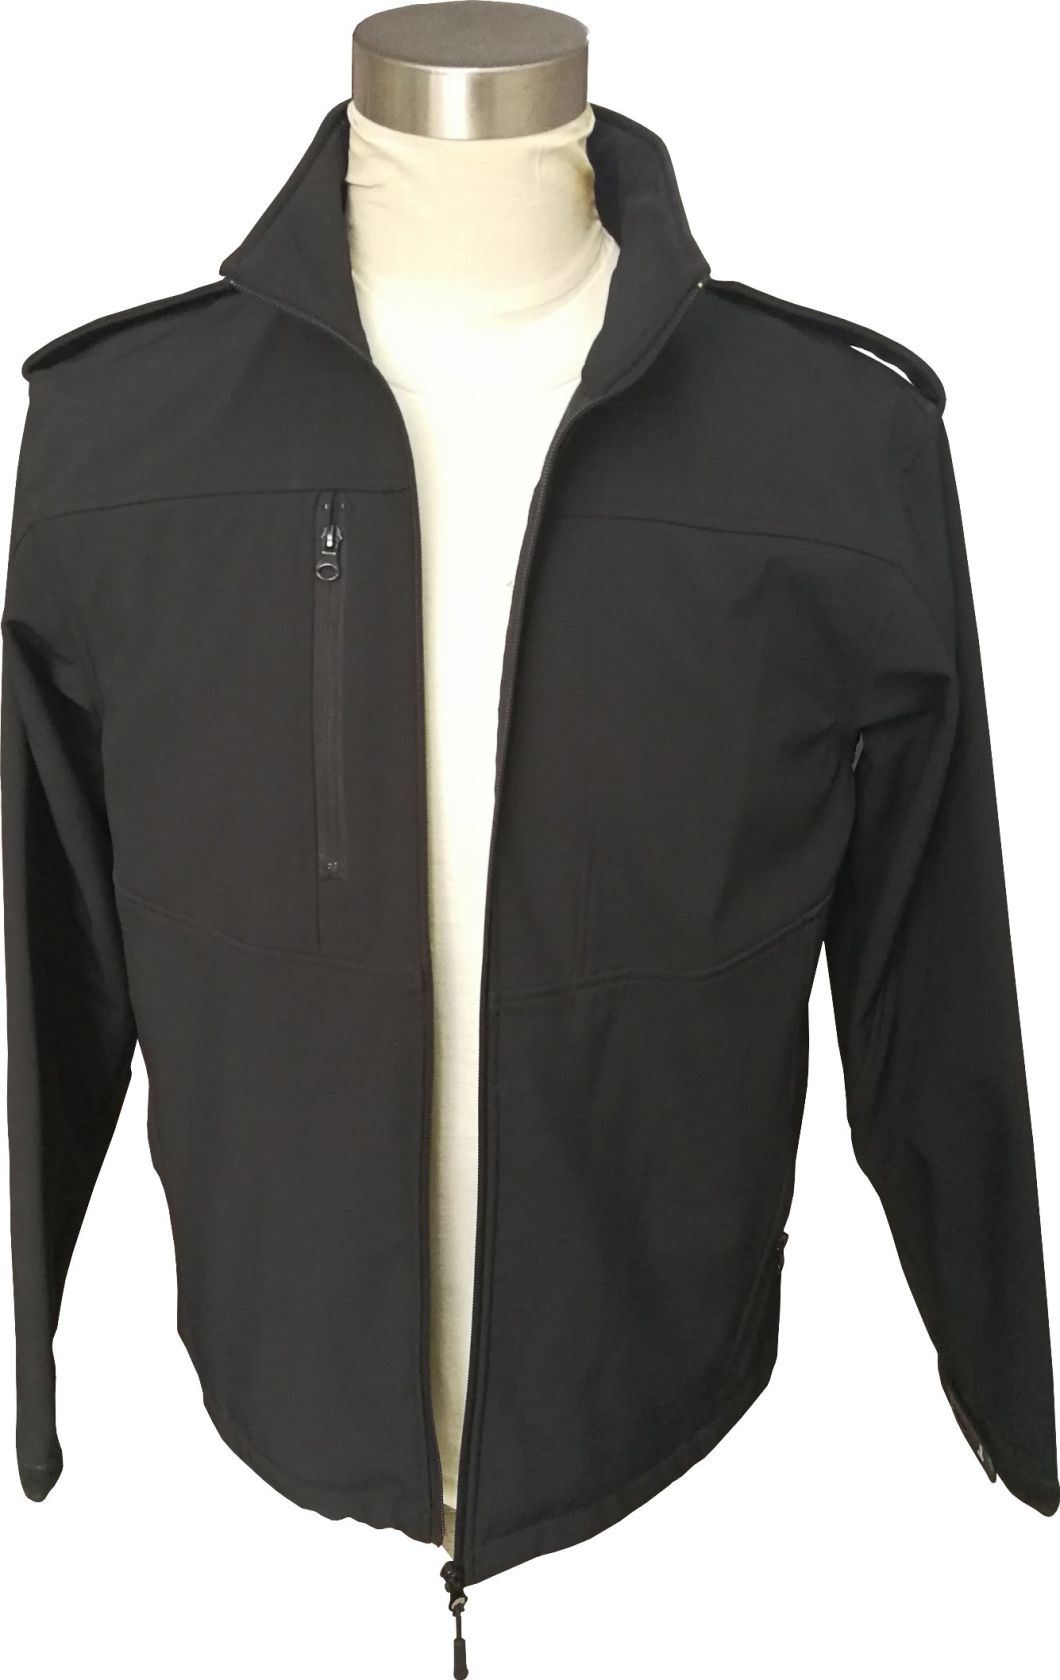 Panlalaking Fost Shell Jacket Outerwear Water Resisitant at Windproof